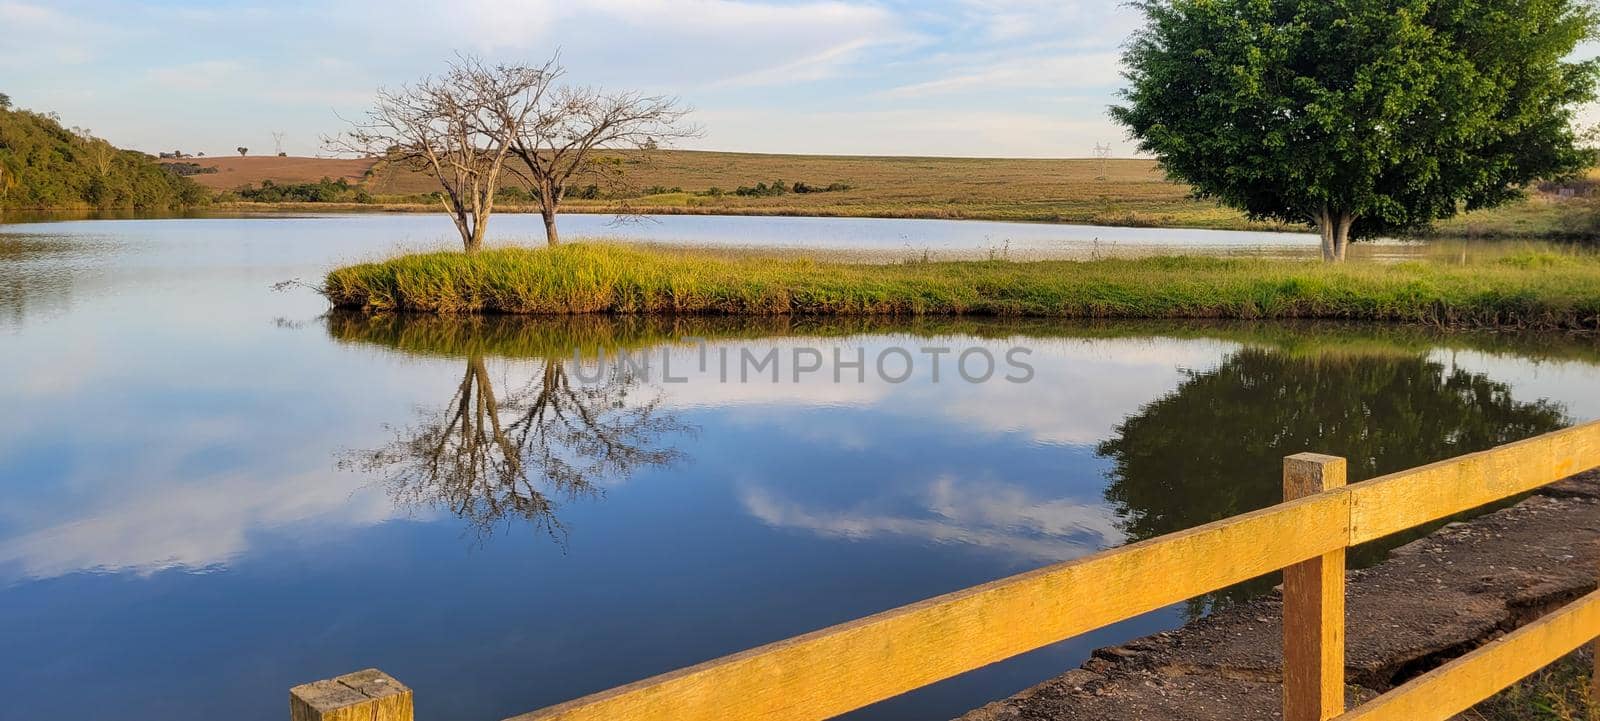 lake with a natural landscape of a farm in the countryside of Brazil with trees and lawn around it